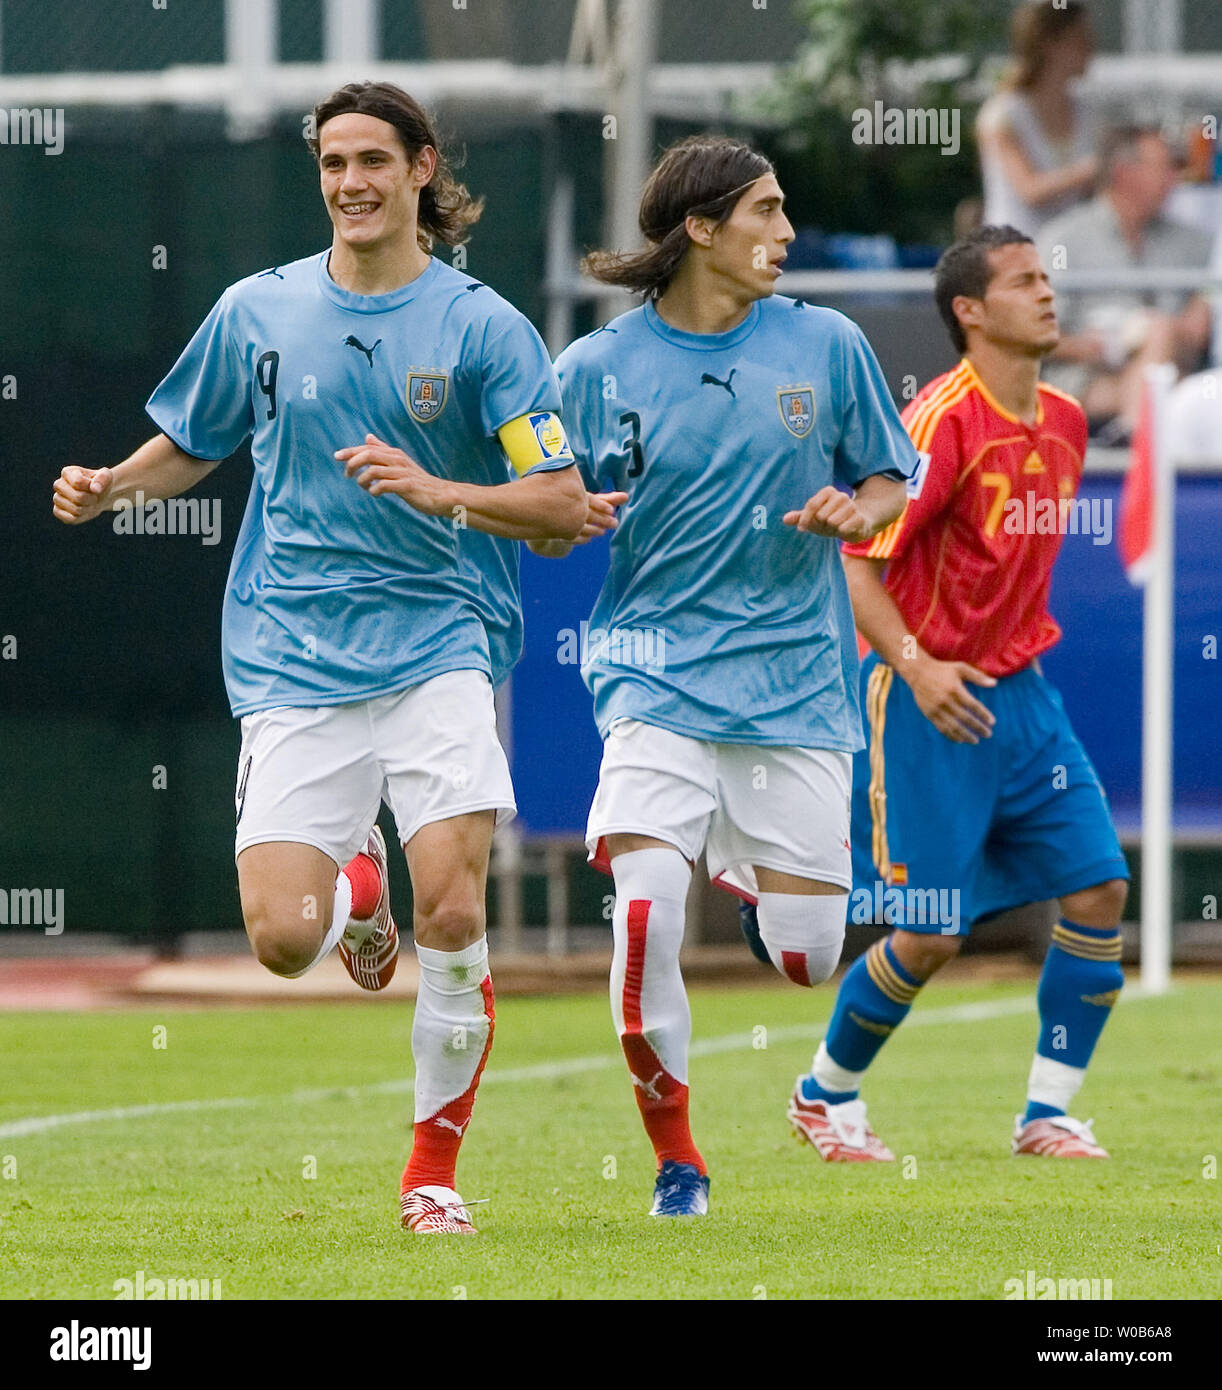 Spain's goalkeeper Toni Calvo (R) grimaces after Uruguay's Edinson Cavani (L) scored the first goal of the game during the second half of a 2007 FIFA U-20 World Cup soccer match at Swangard stadium in Burnaby, British Columbia,  July 1, 2007. Uruguay's Martin Caceres (3) follows the goal scorer.  The game ended in a 2-2 tie.  (UPI Photo/Heinz Ruckemann) Stock Photo